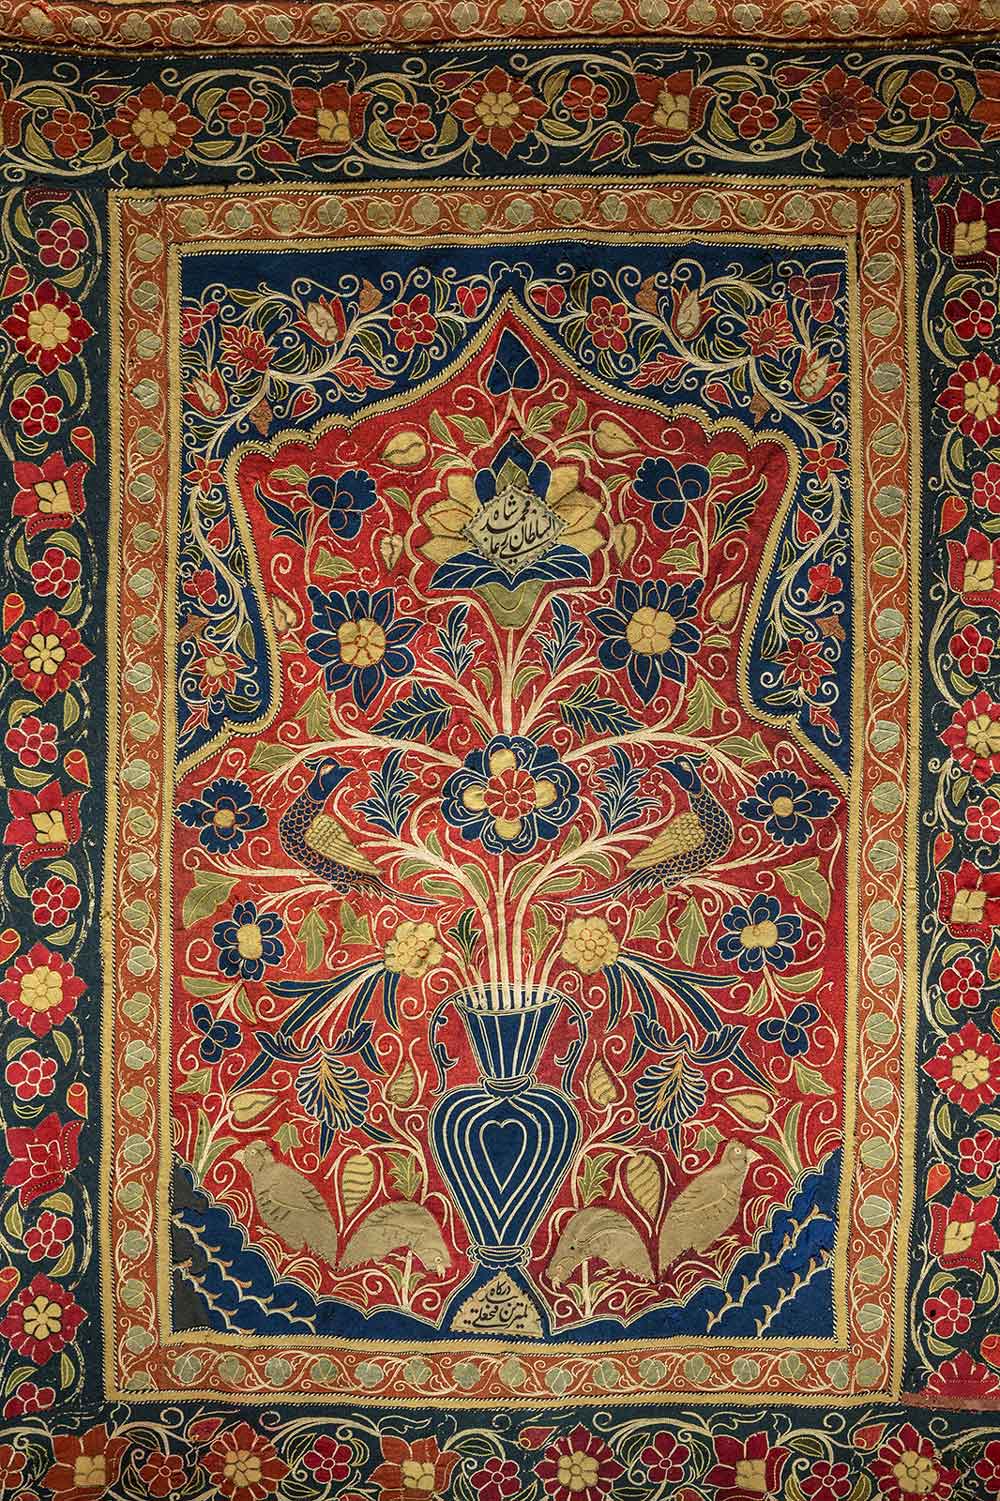 Qajar Imperial Tent, Cleveland Museum of Art